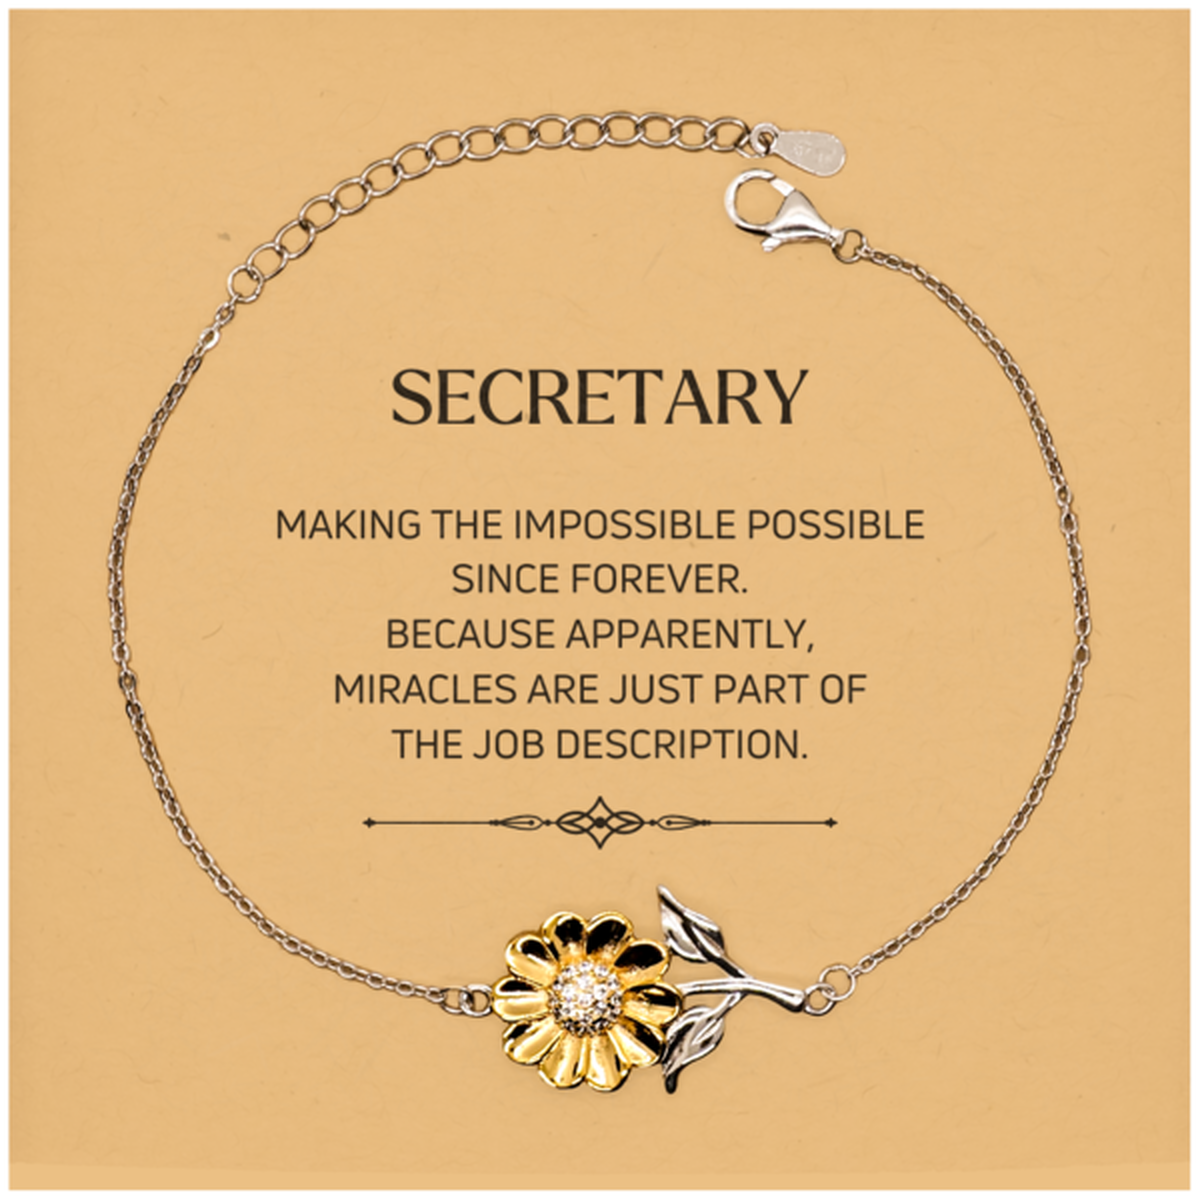 Funny Secretary Gifts, Miracles are just part of the job description, Inspirational Birthday Christmas Sunflower Bracelet For Secretary, Men, Women, Coworkers, Friends, Boss